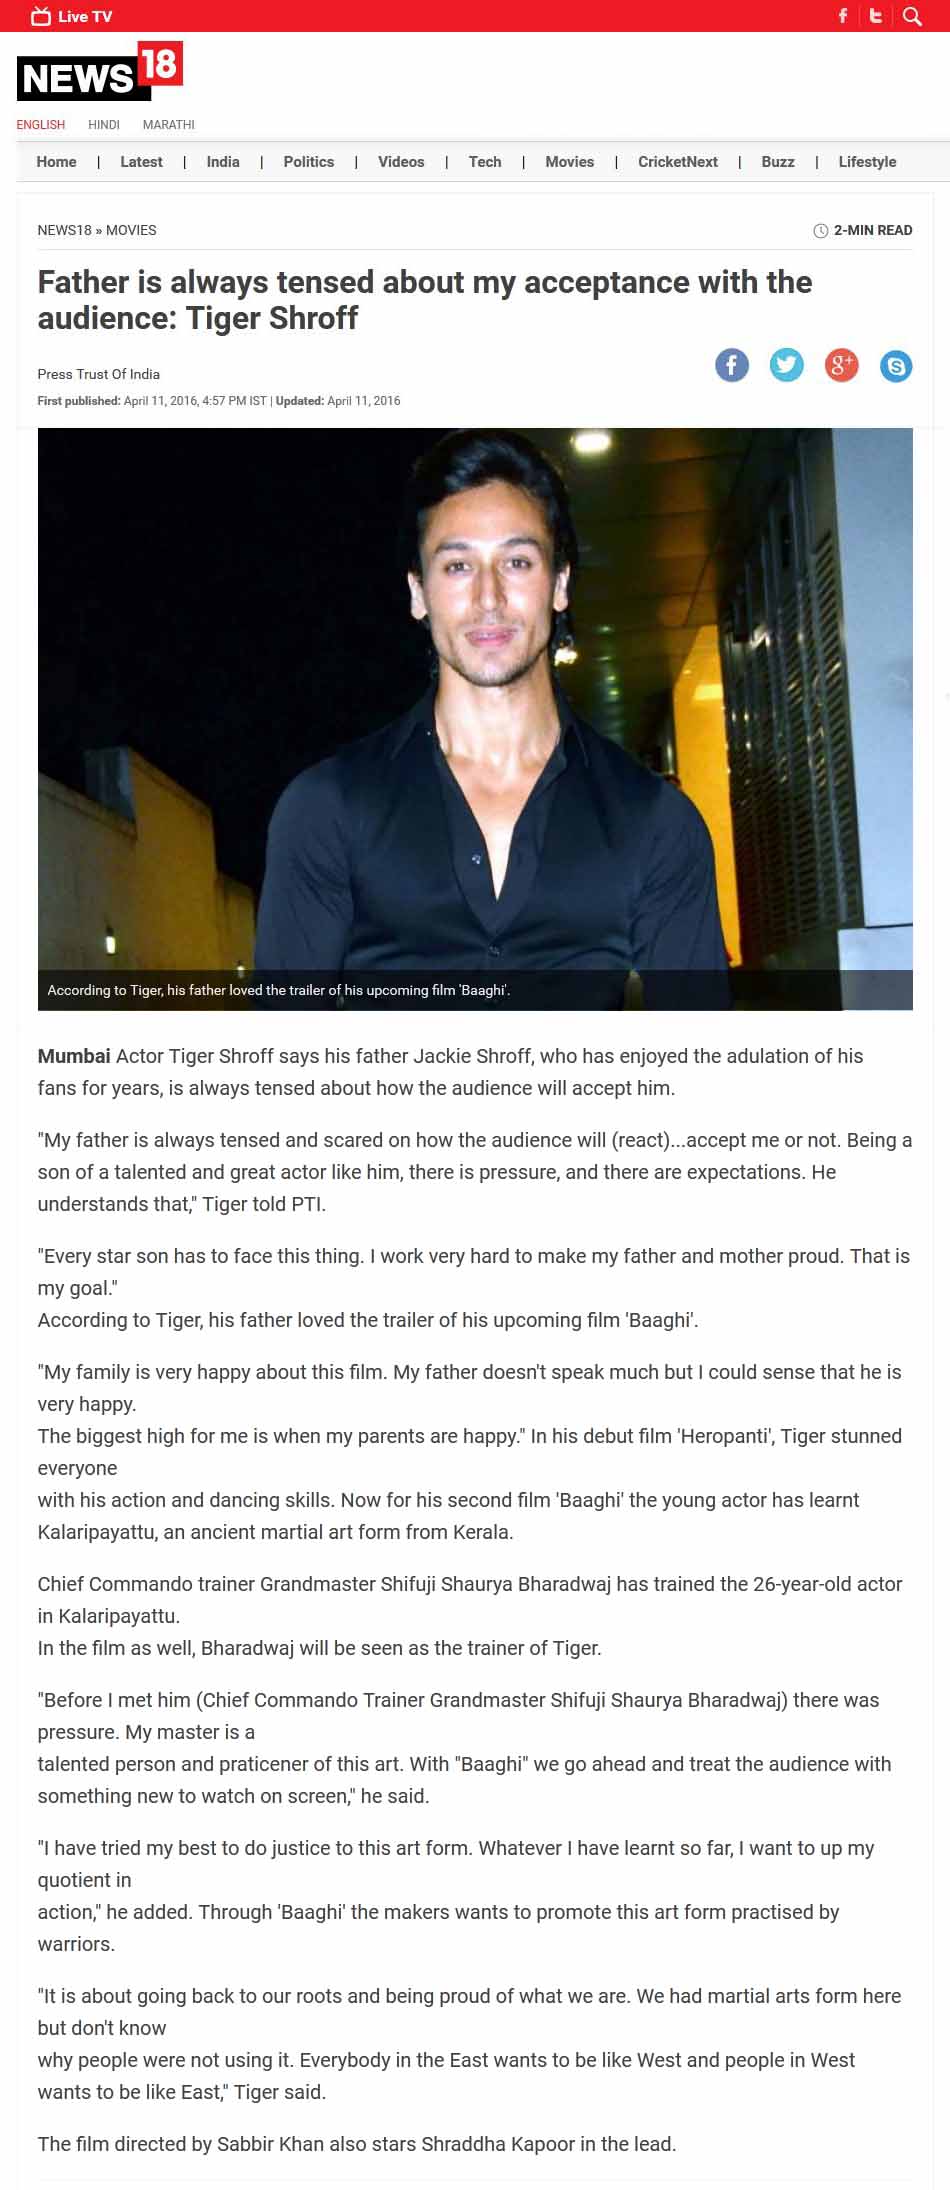 Father is always tensed about my acceptance with the audience: Tiger Shroff